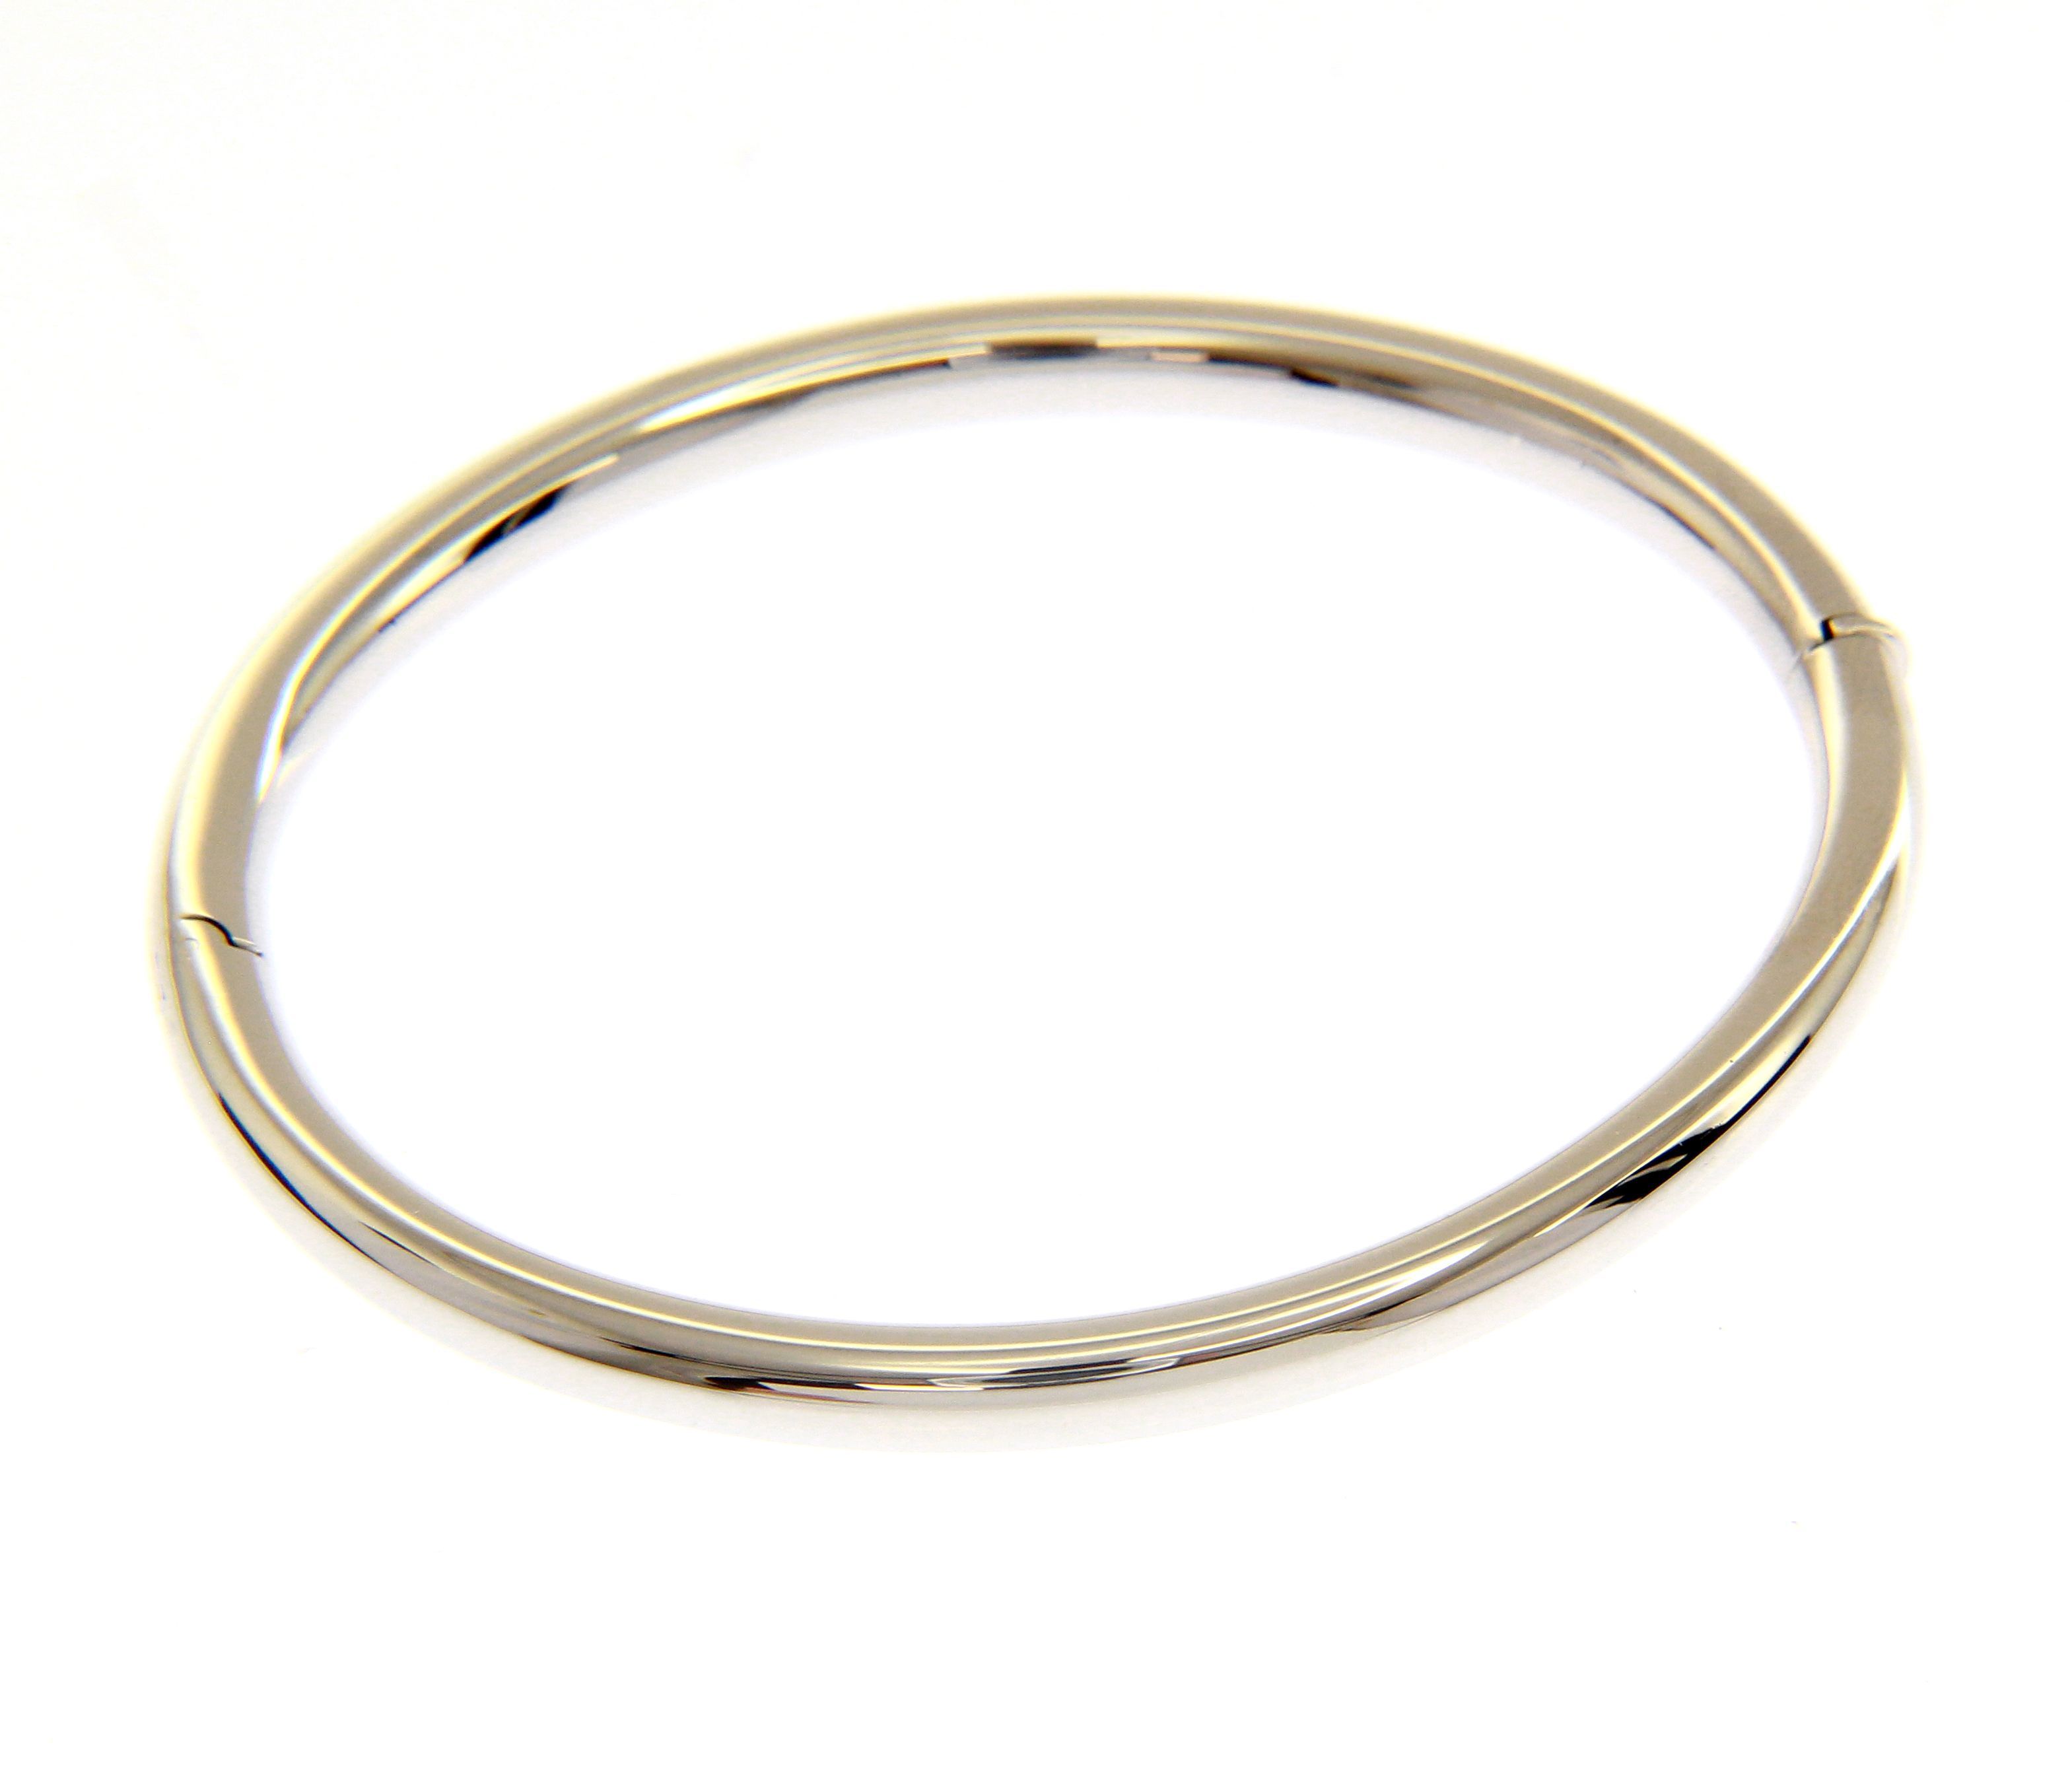 White gold oval bracelet with clasp k14(code S205094)